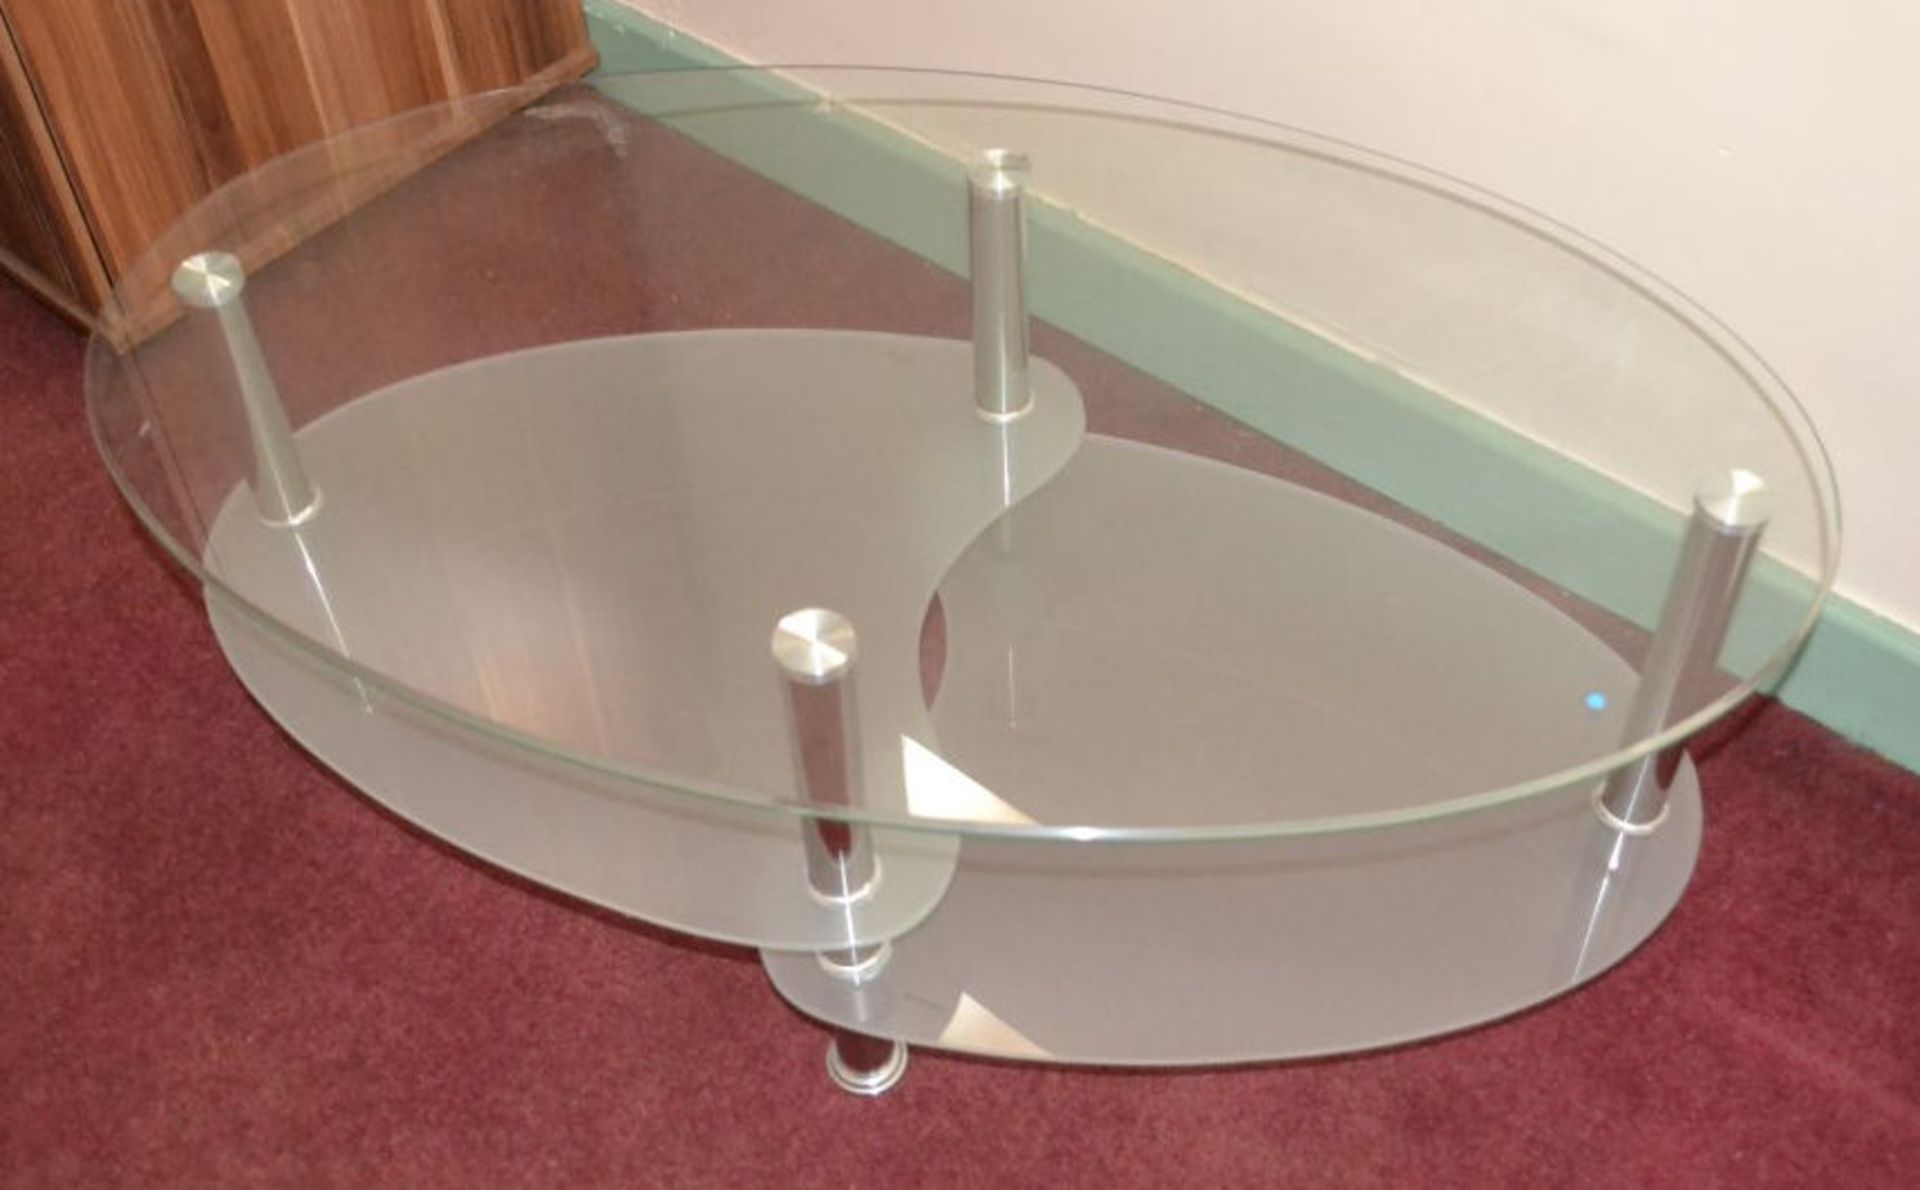 1 x Contemporary Glass and Stainless Steel Oval Coffee Table With 2 Tiered Shelves - Image 4 of 5